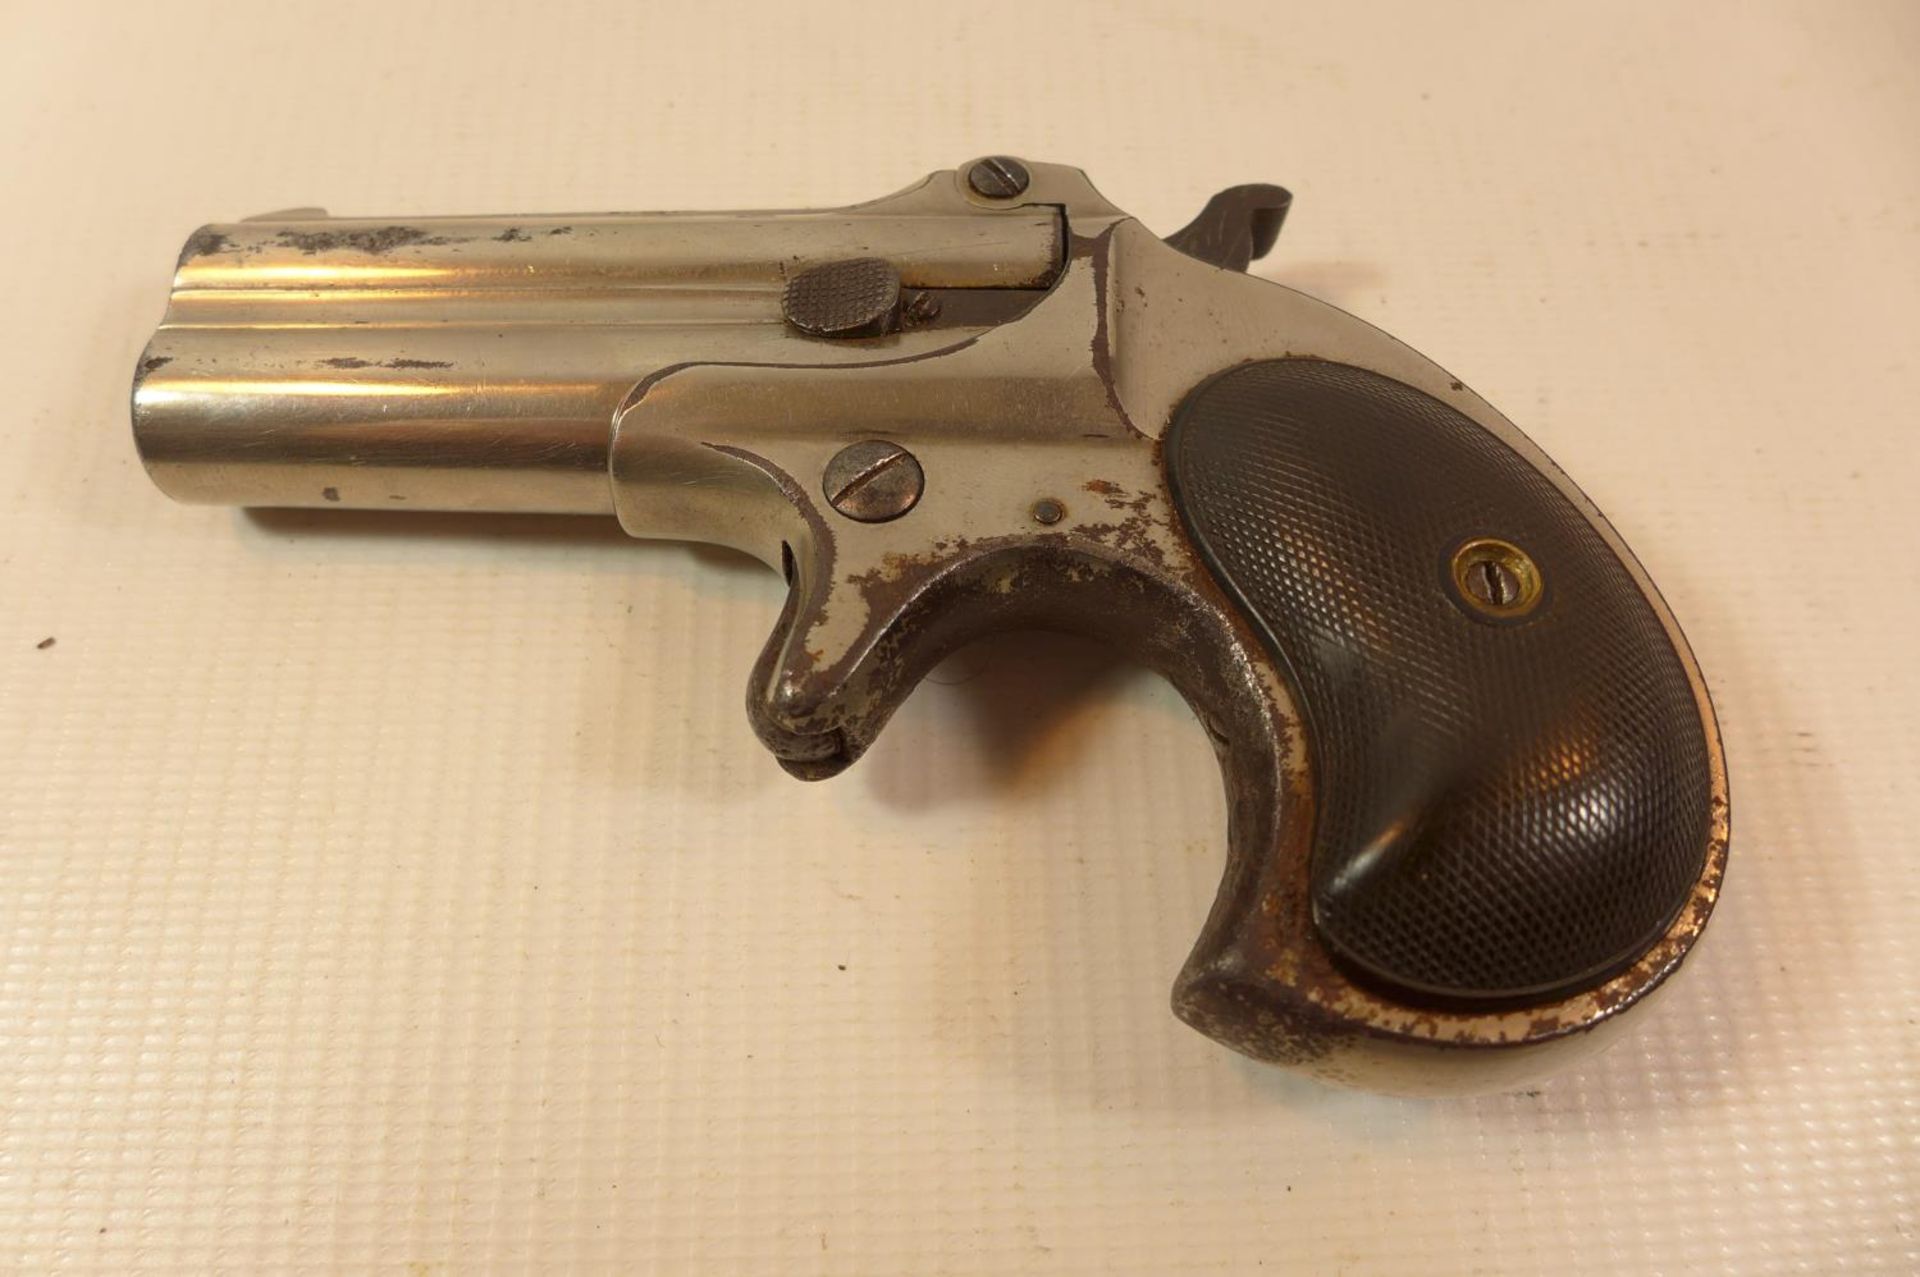 A REMINGTON 41 CALIBRE RIMFIRE OVER AND UNDER DERRINGER, WITH A 7.5CM BARREL MARKED REMINGTON ARMS - Image 2 of 9